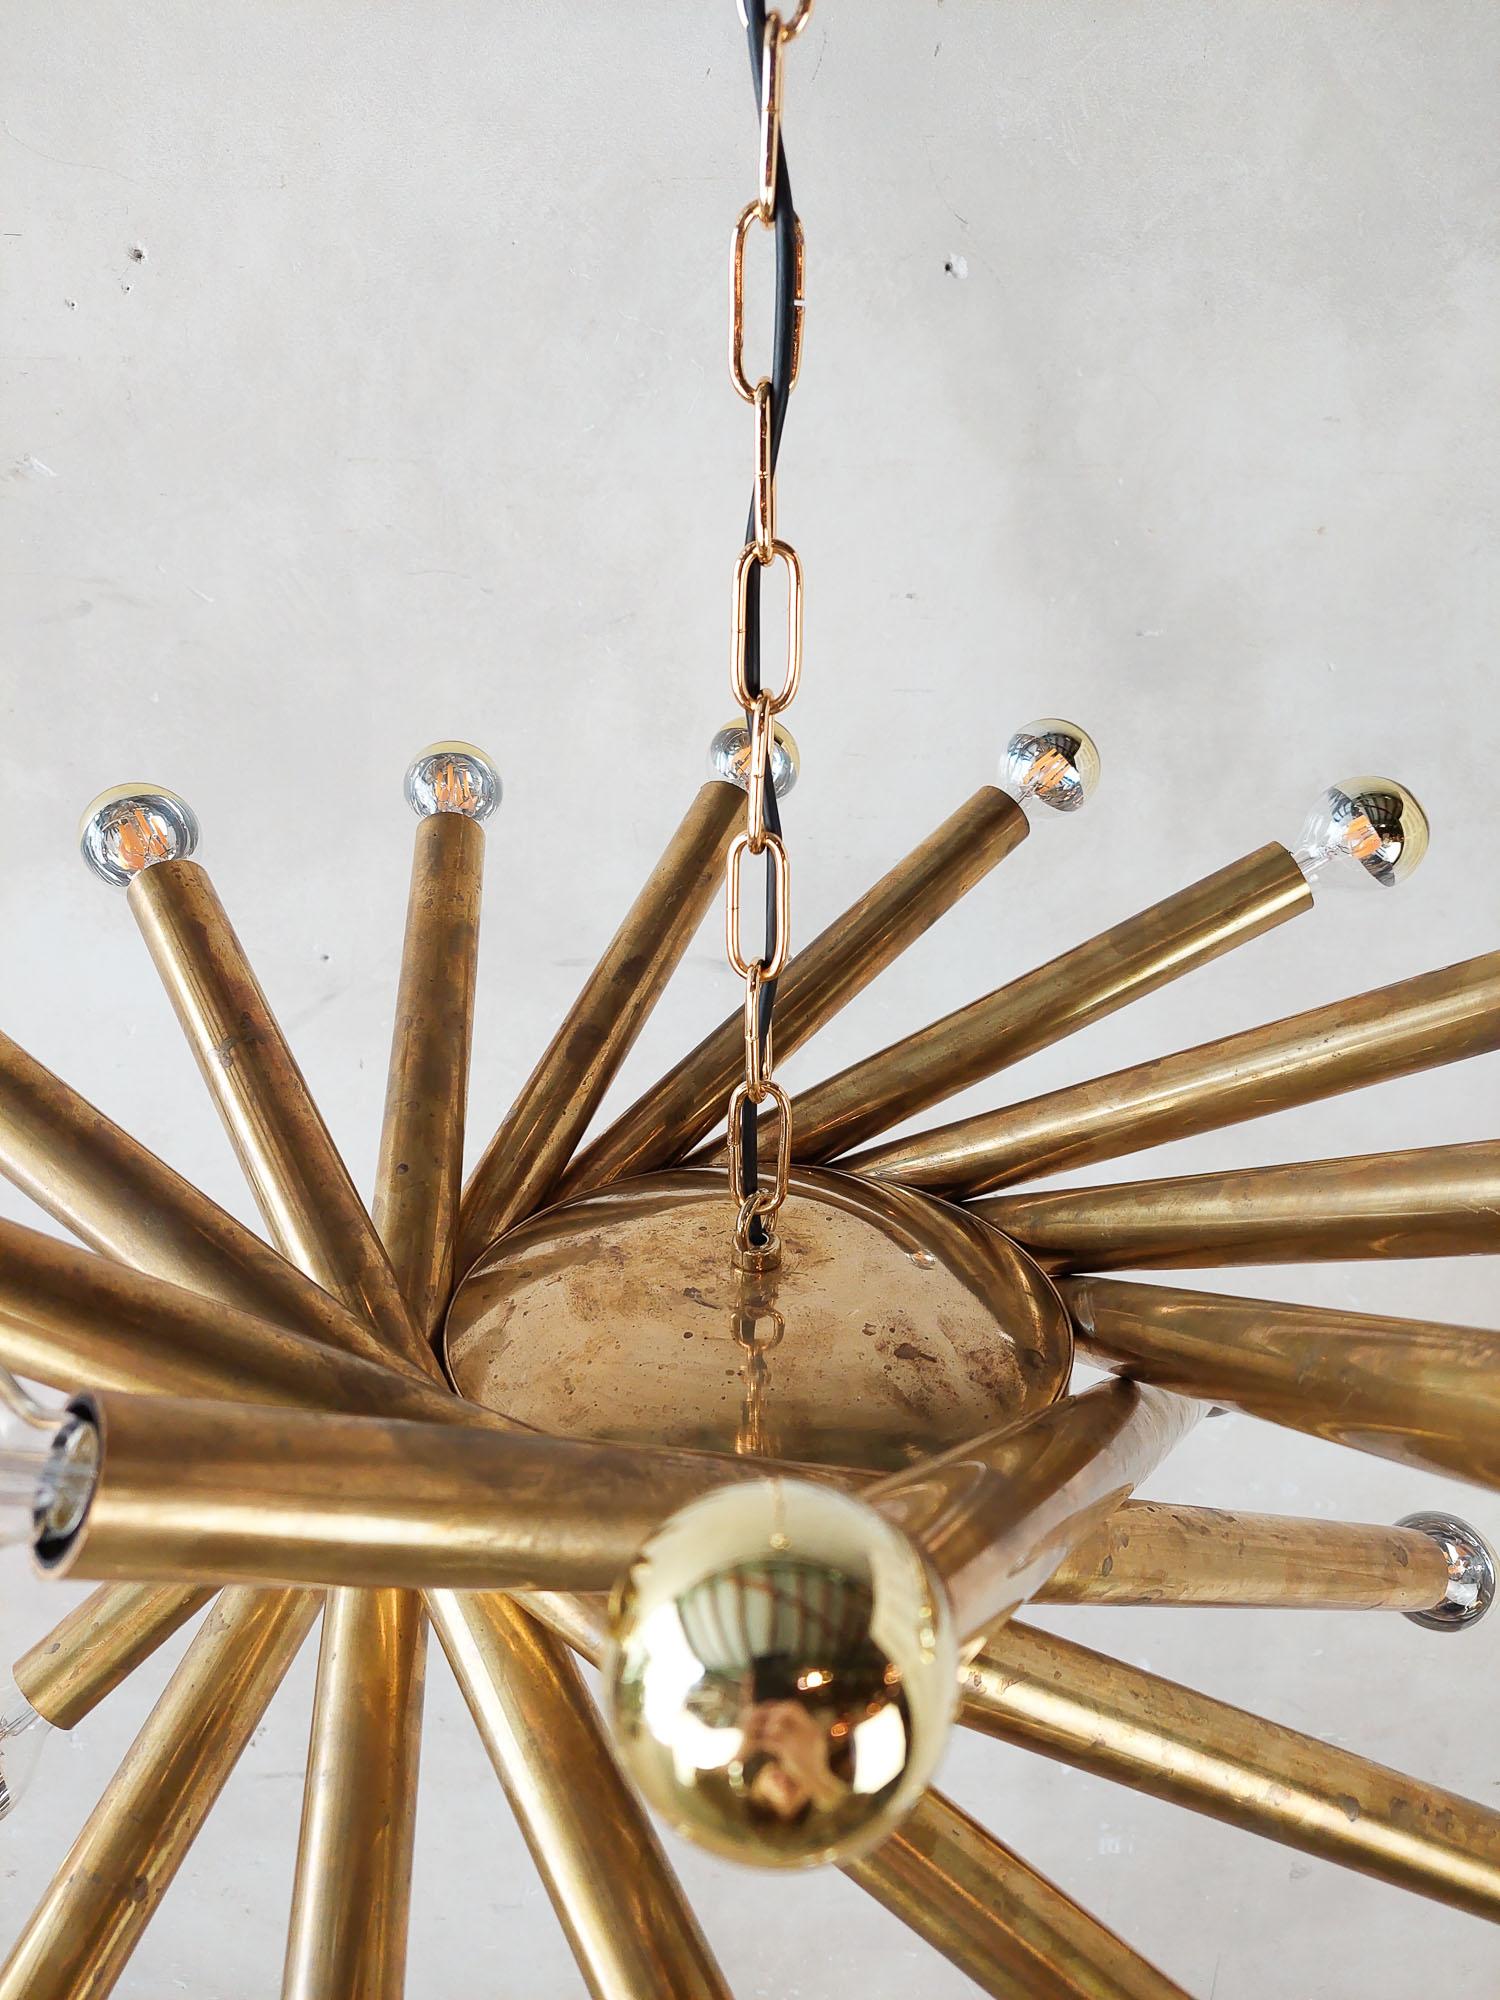 Pair of Midcentury Italian Brass Pendant Lamps by Stilnovo from the 1950s In Good Condition For Sale In Baambrugge, NL